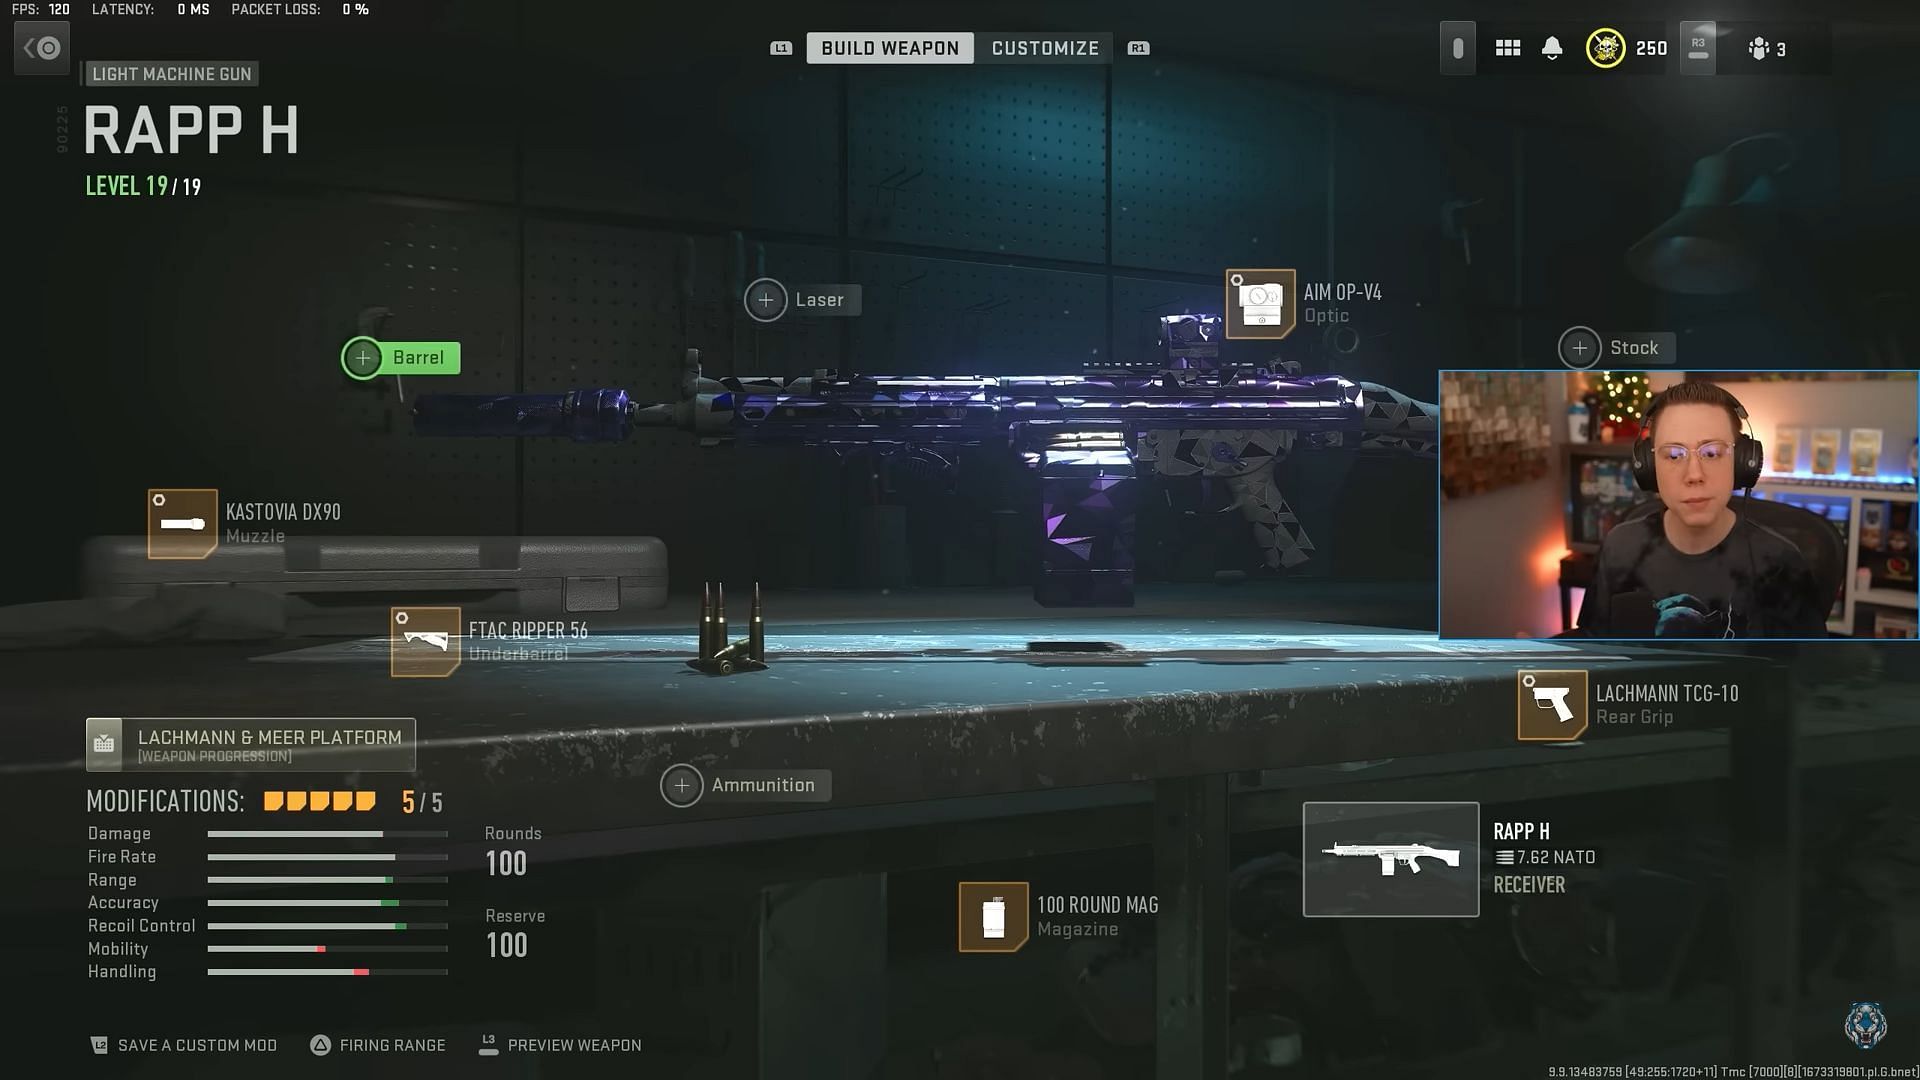 Loadout for RAAP H in Warzone 2 Season 1 Reloaded (Image via Activision and YouTube/WhosImmortal)